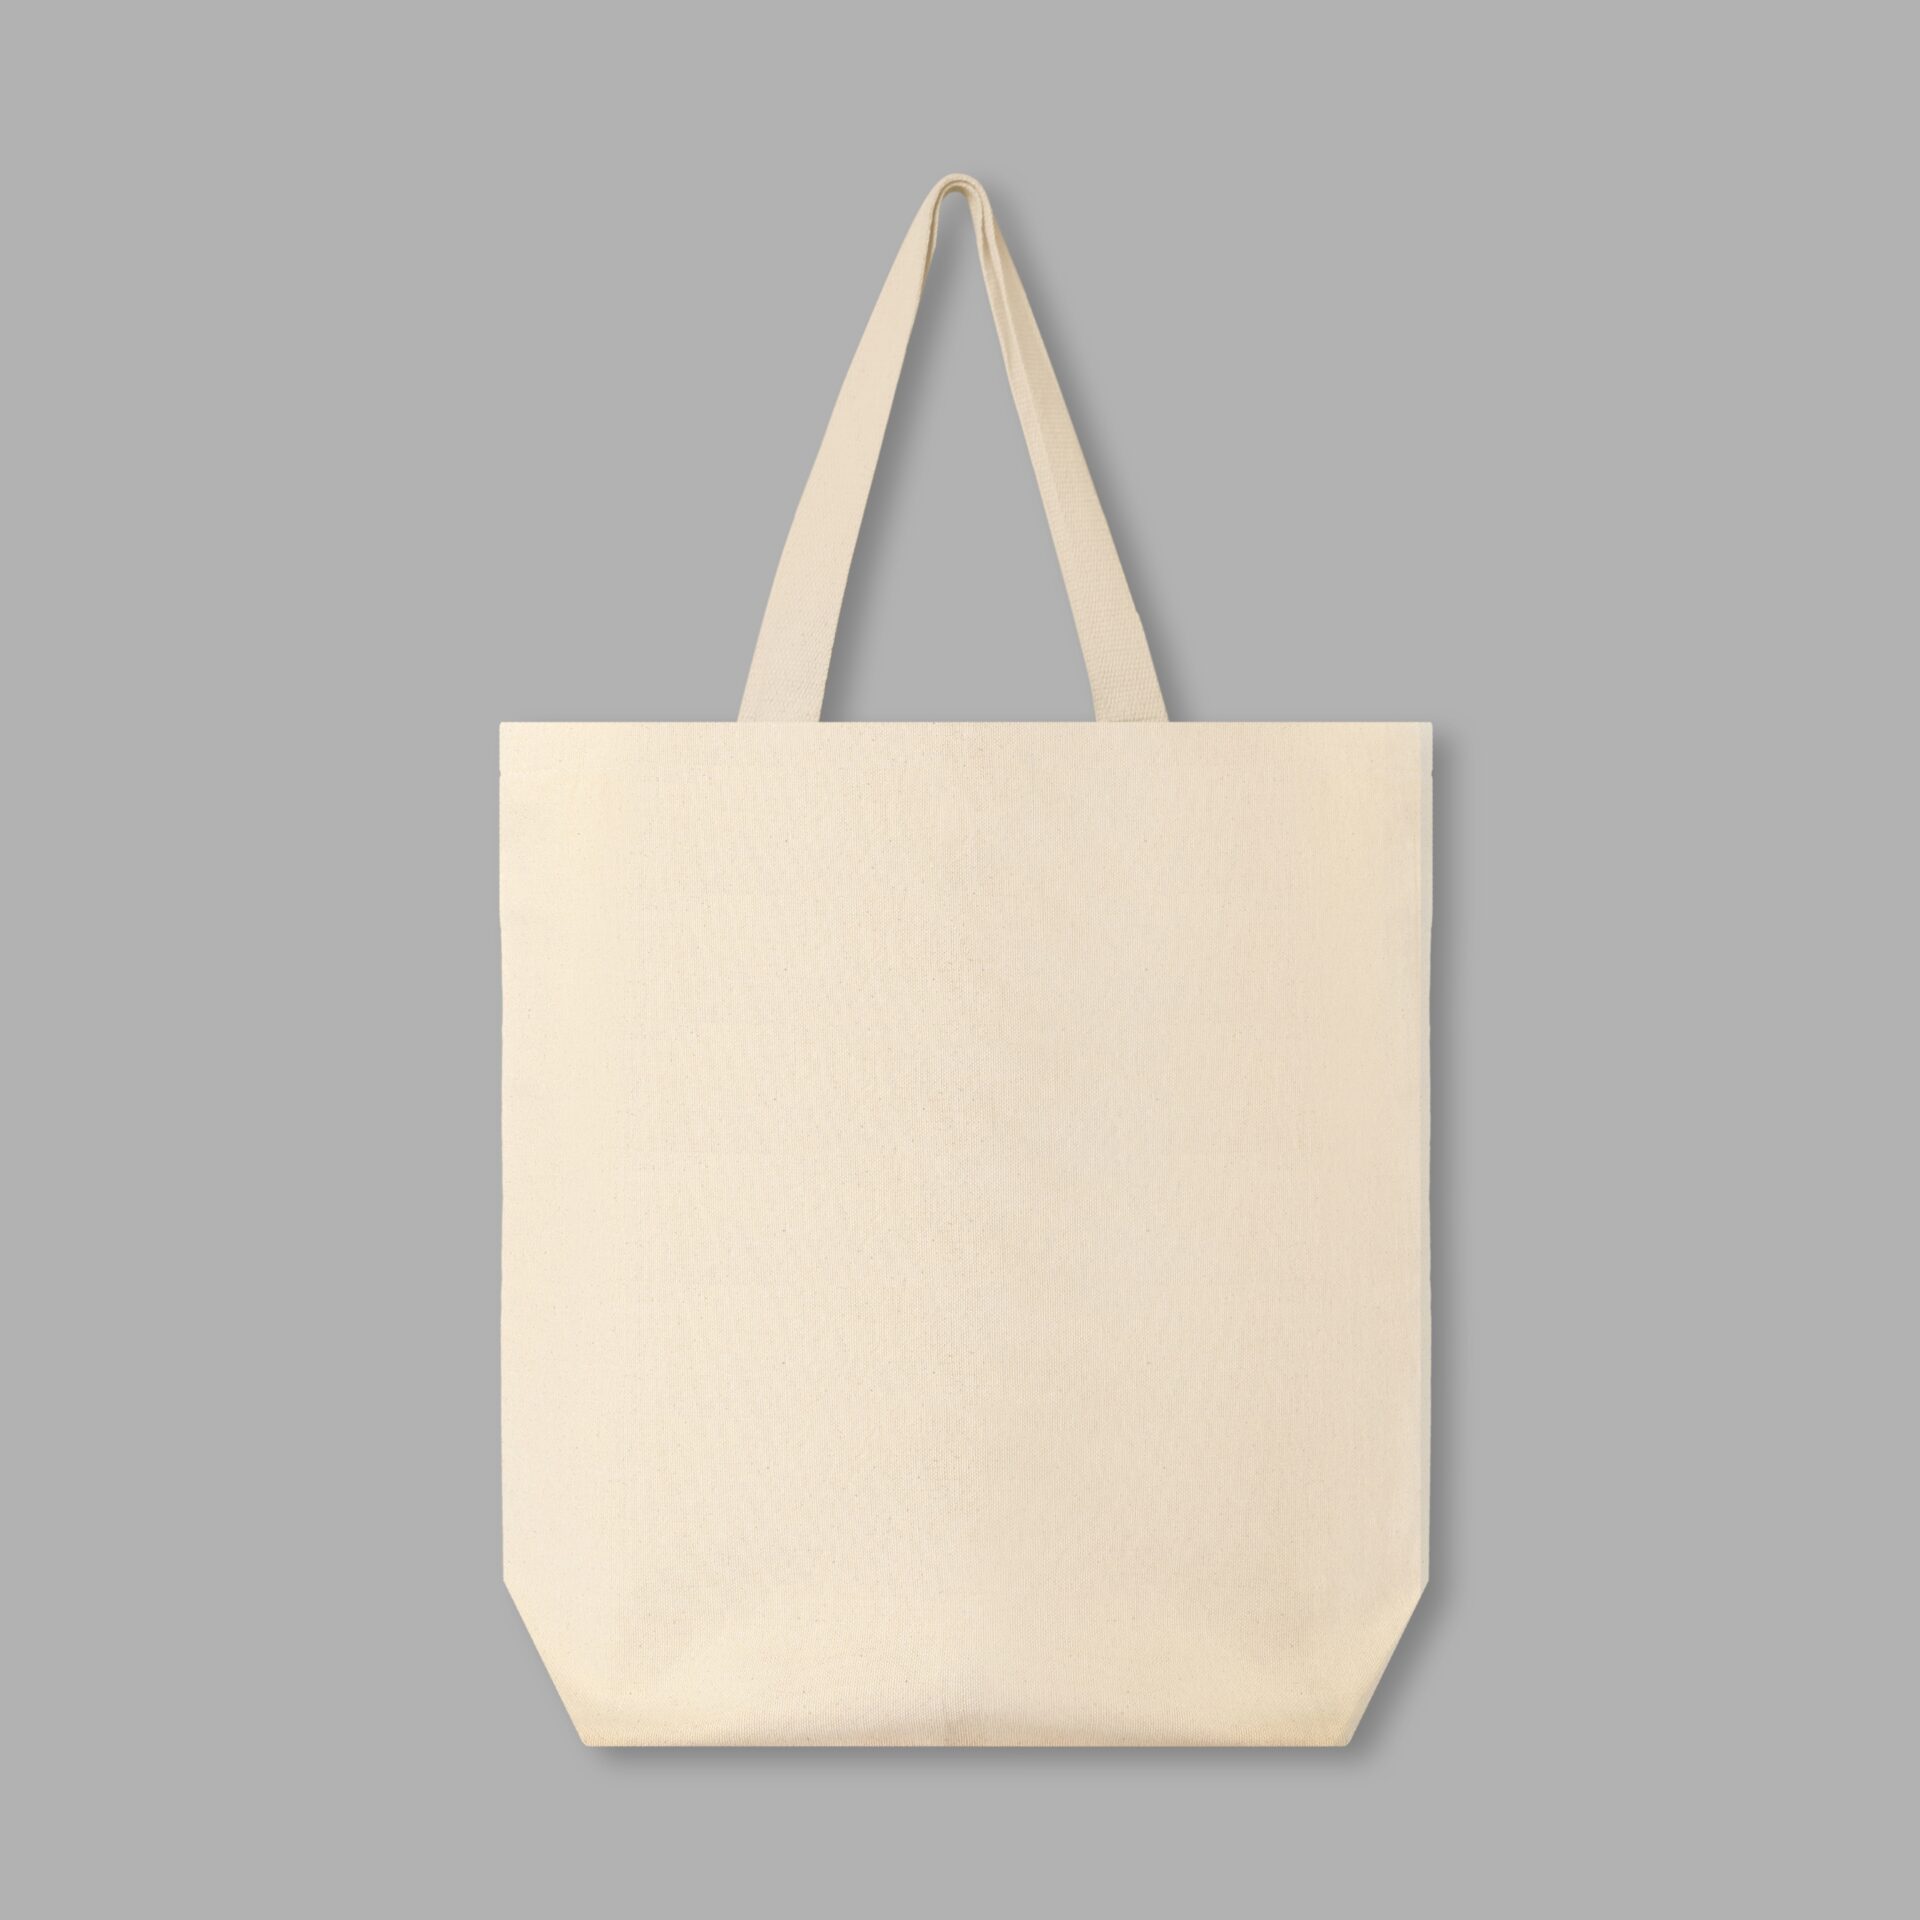 corporate gifts singapore tote bag